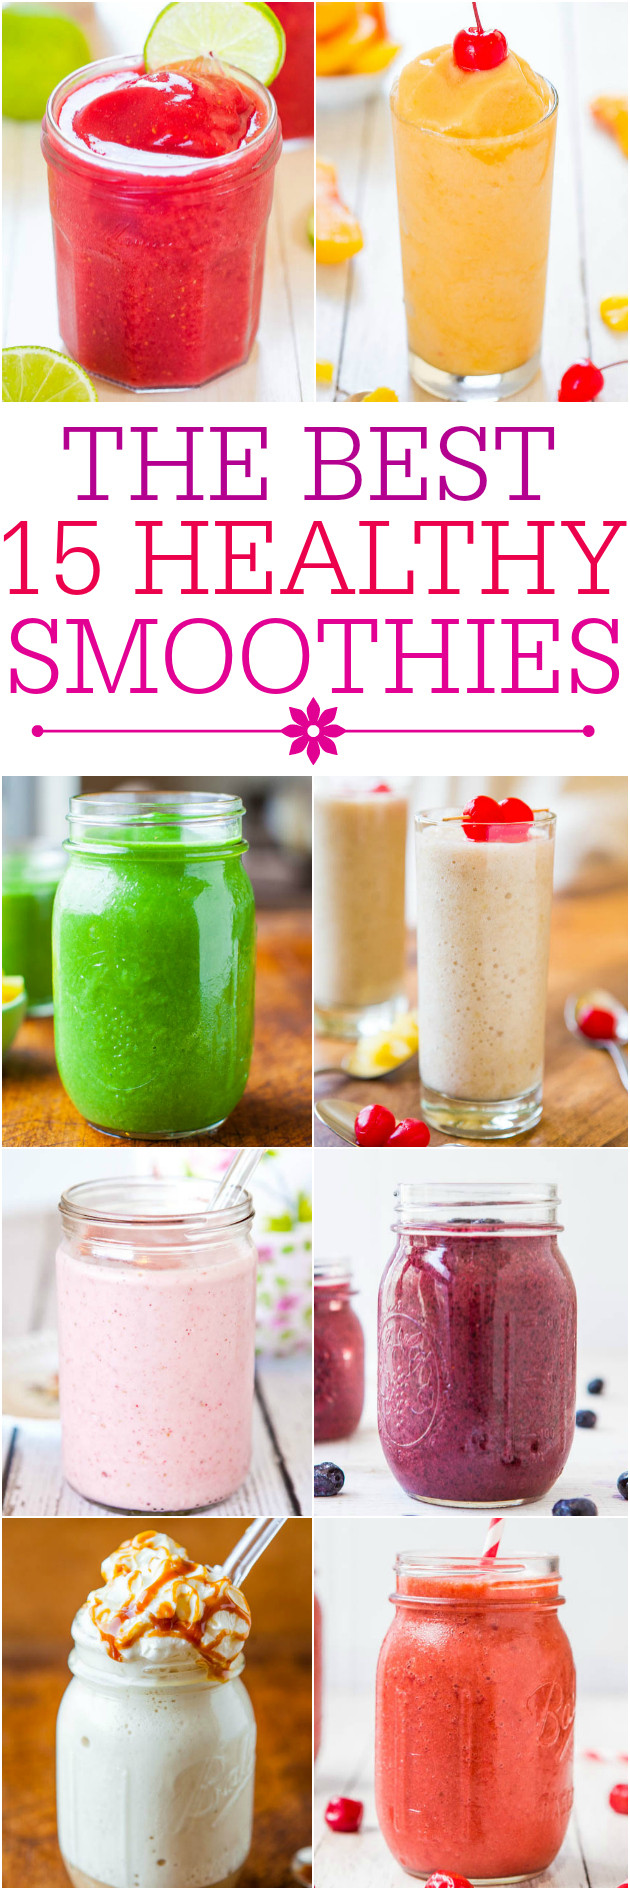 Healthy Fruit Smoothie Recipes
 healthy fruit smoothie recipes